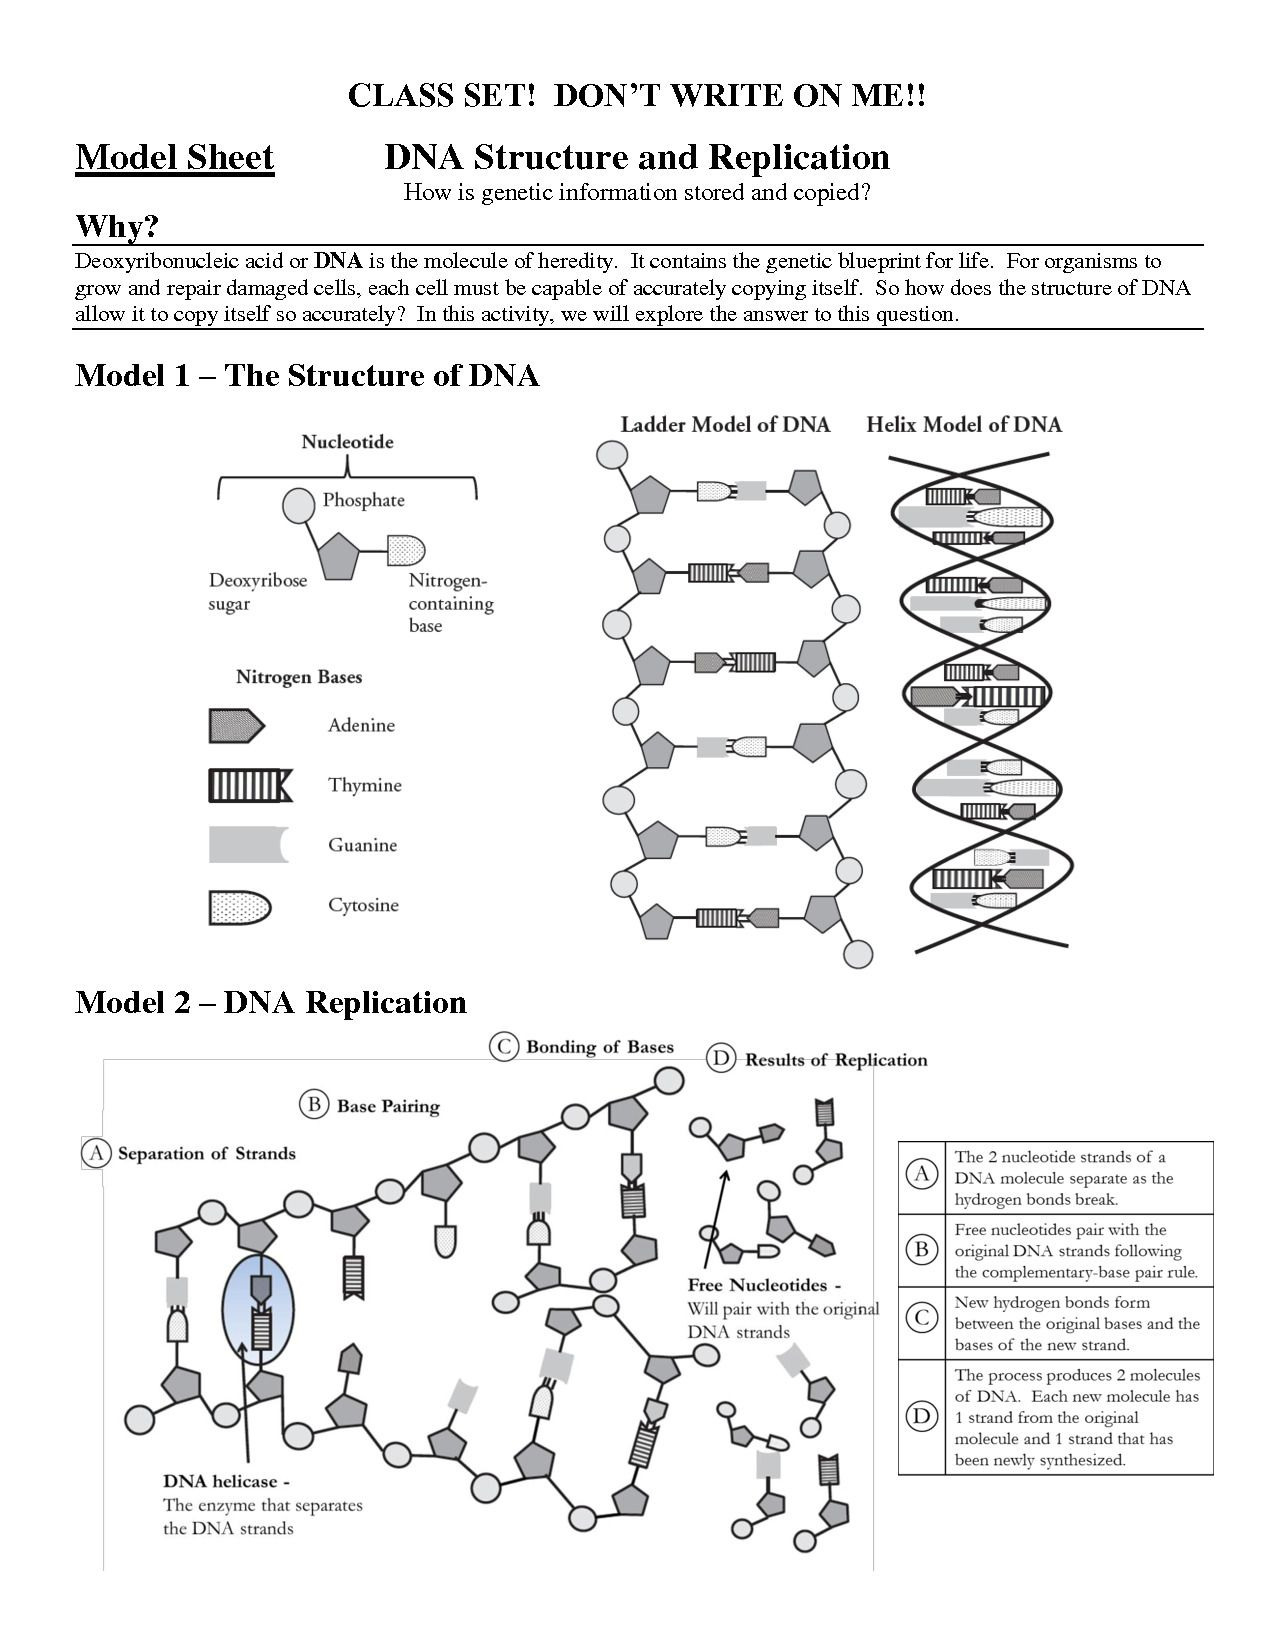 cell-cycle-and-dna-replication-practice-worksheet-key-db-excel